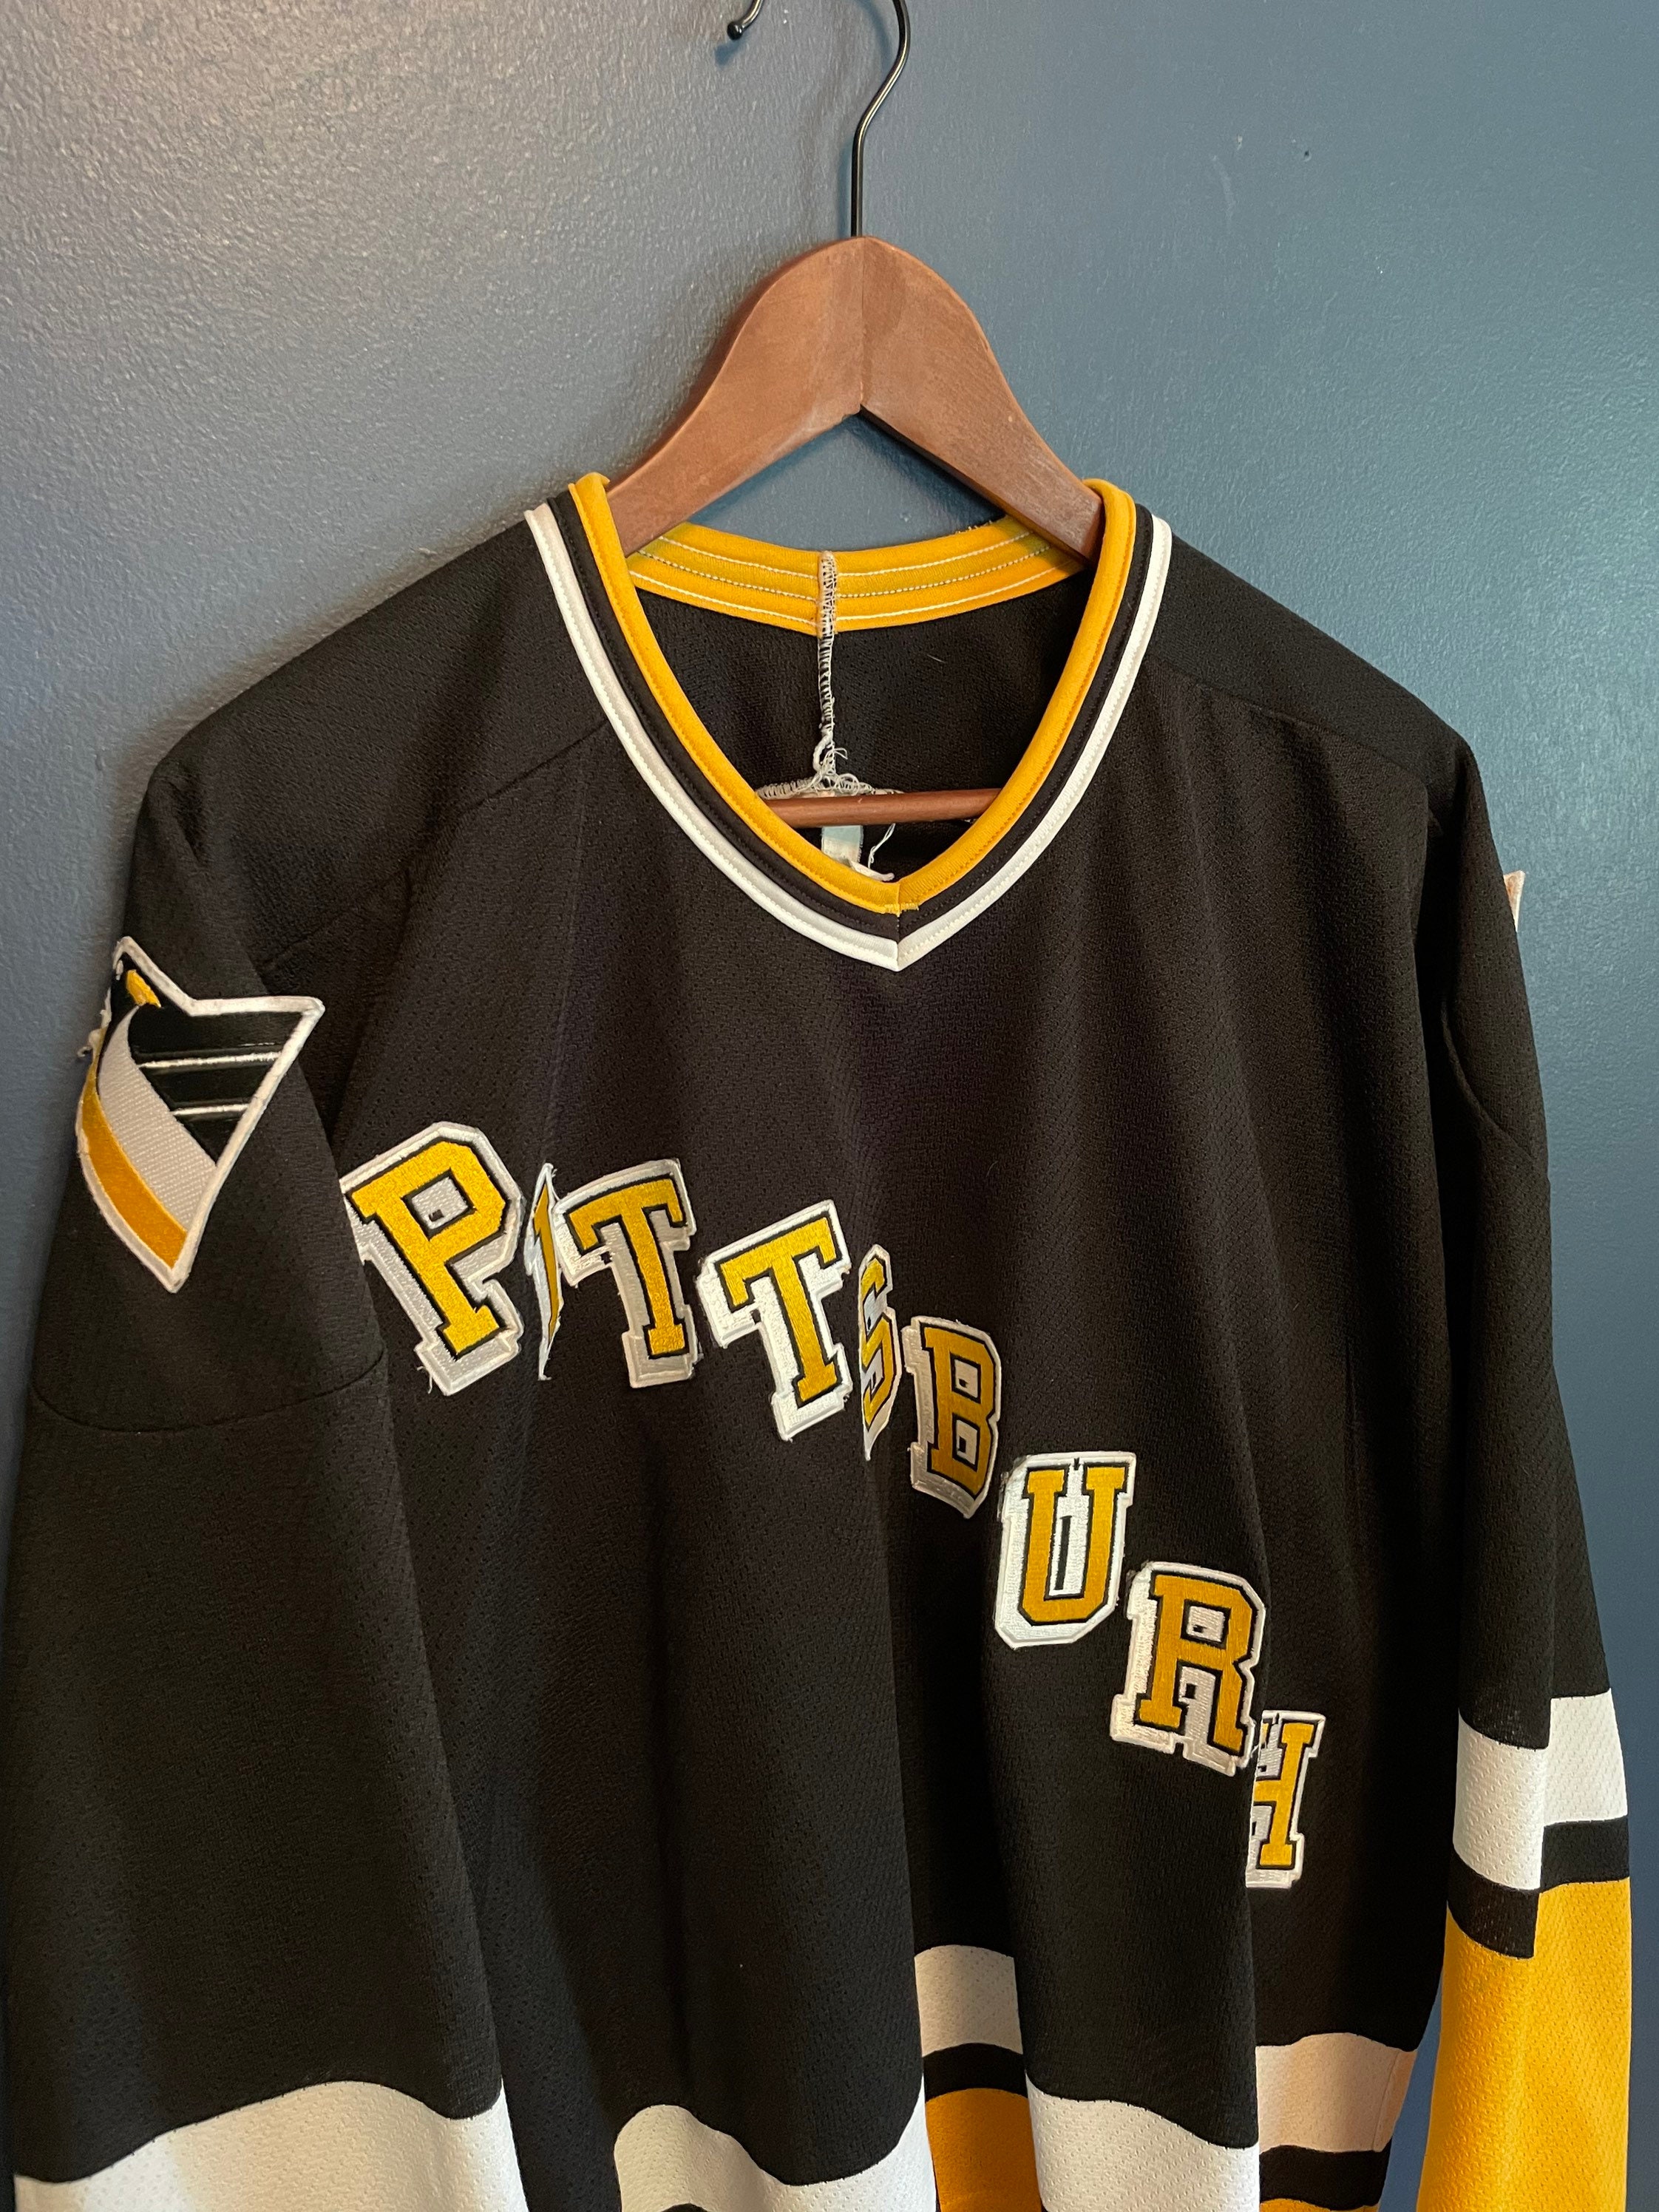 ChitownclassicsCo Vintage 90's Pittsburgh Penguins CCM Stitched Authentic Hockey Jersey Size Large